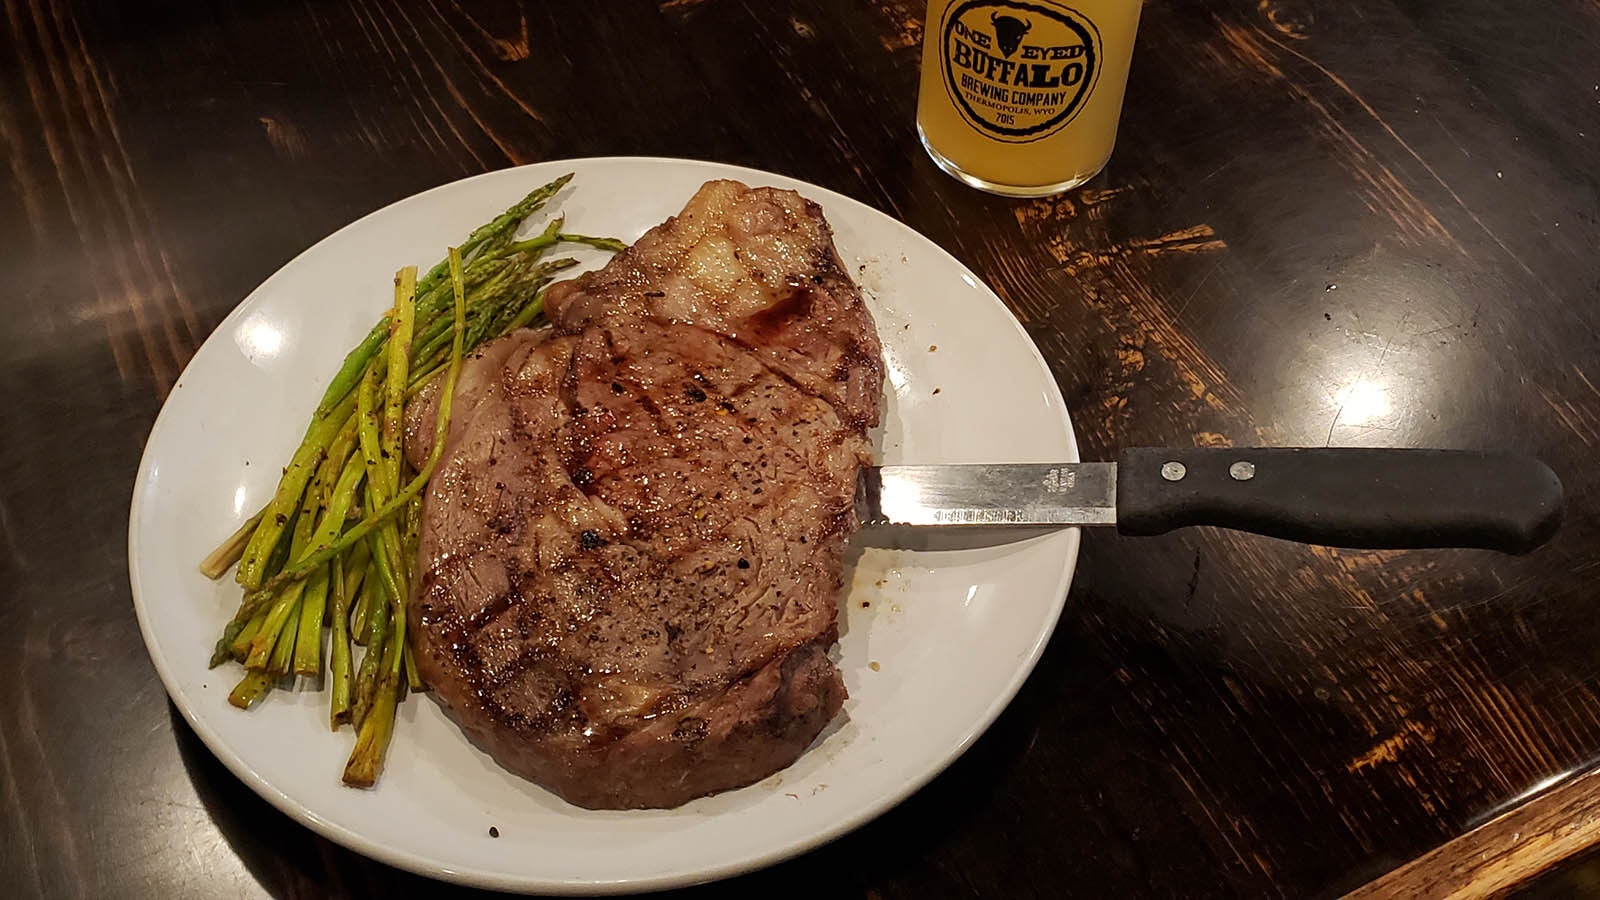 With more than 12 craft brews to choose from, there's bound to always be something to go well with the signature prime rib.